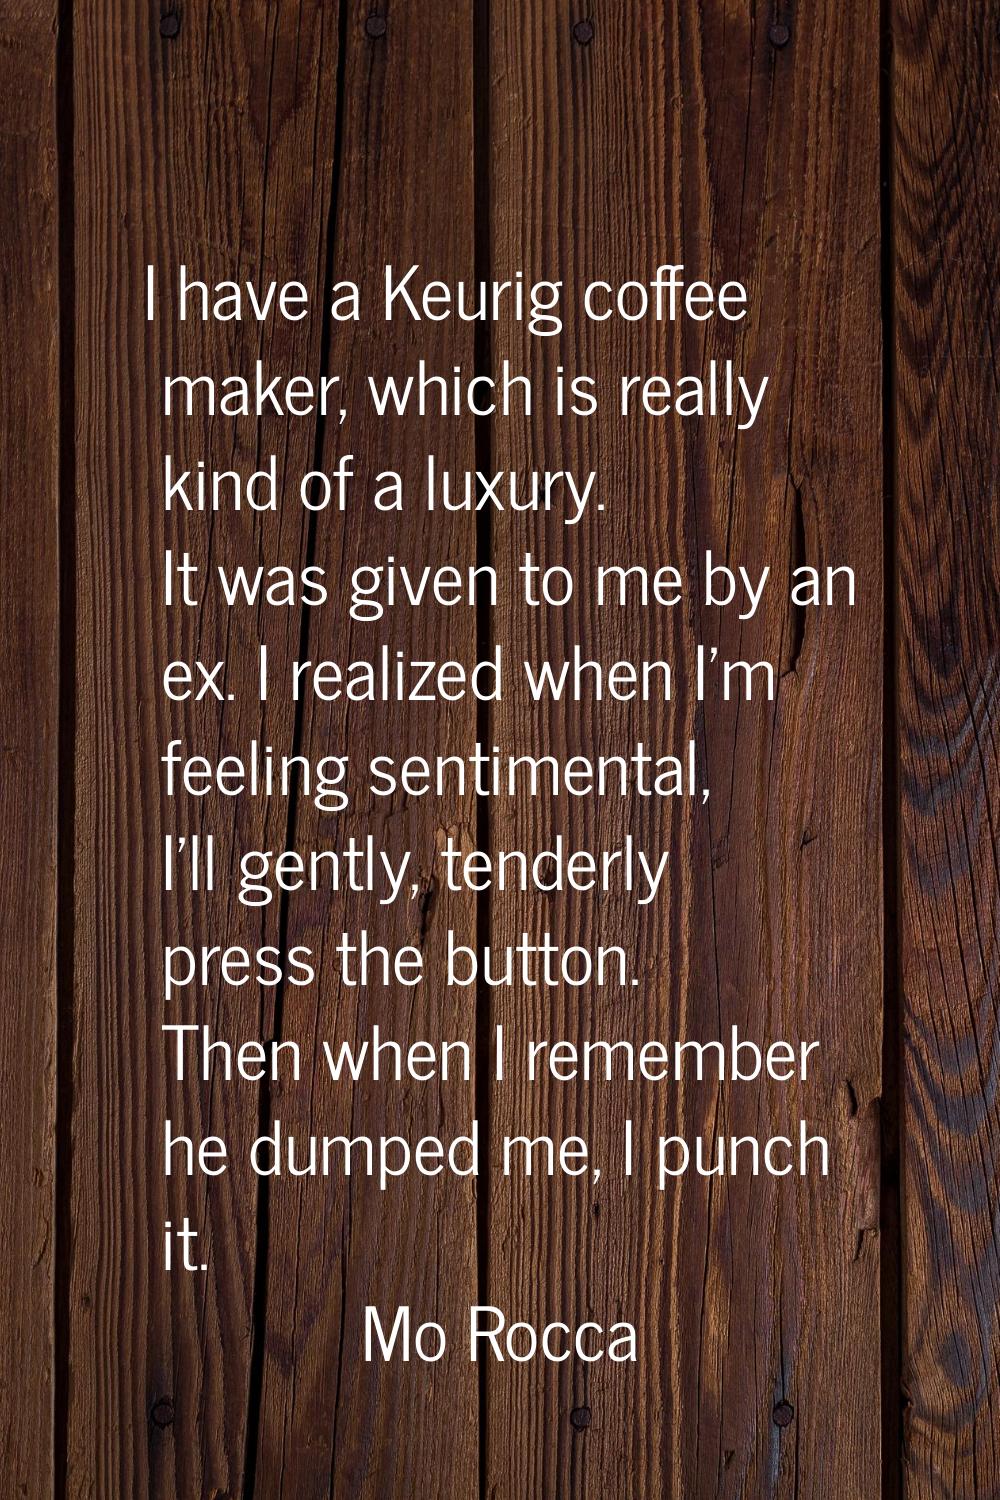 I have a Keurig coffee maker, which is really kind of a luxury. It was given to me by an ex. I real